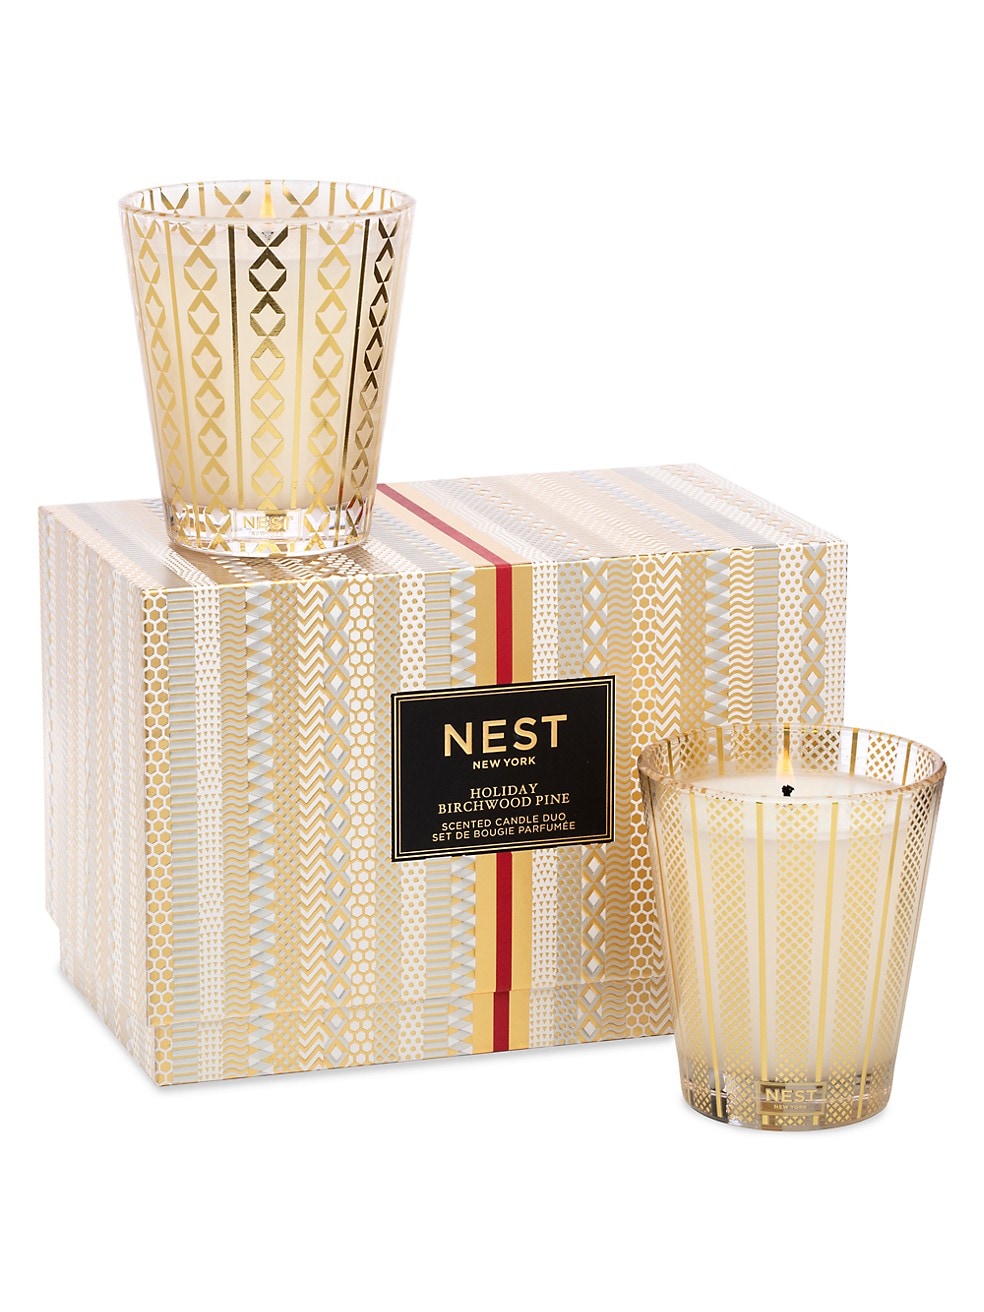 Nest Duo Candle Gift Set